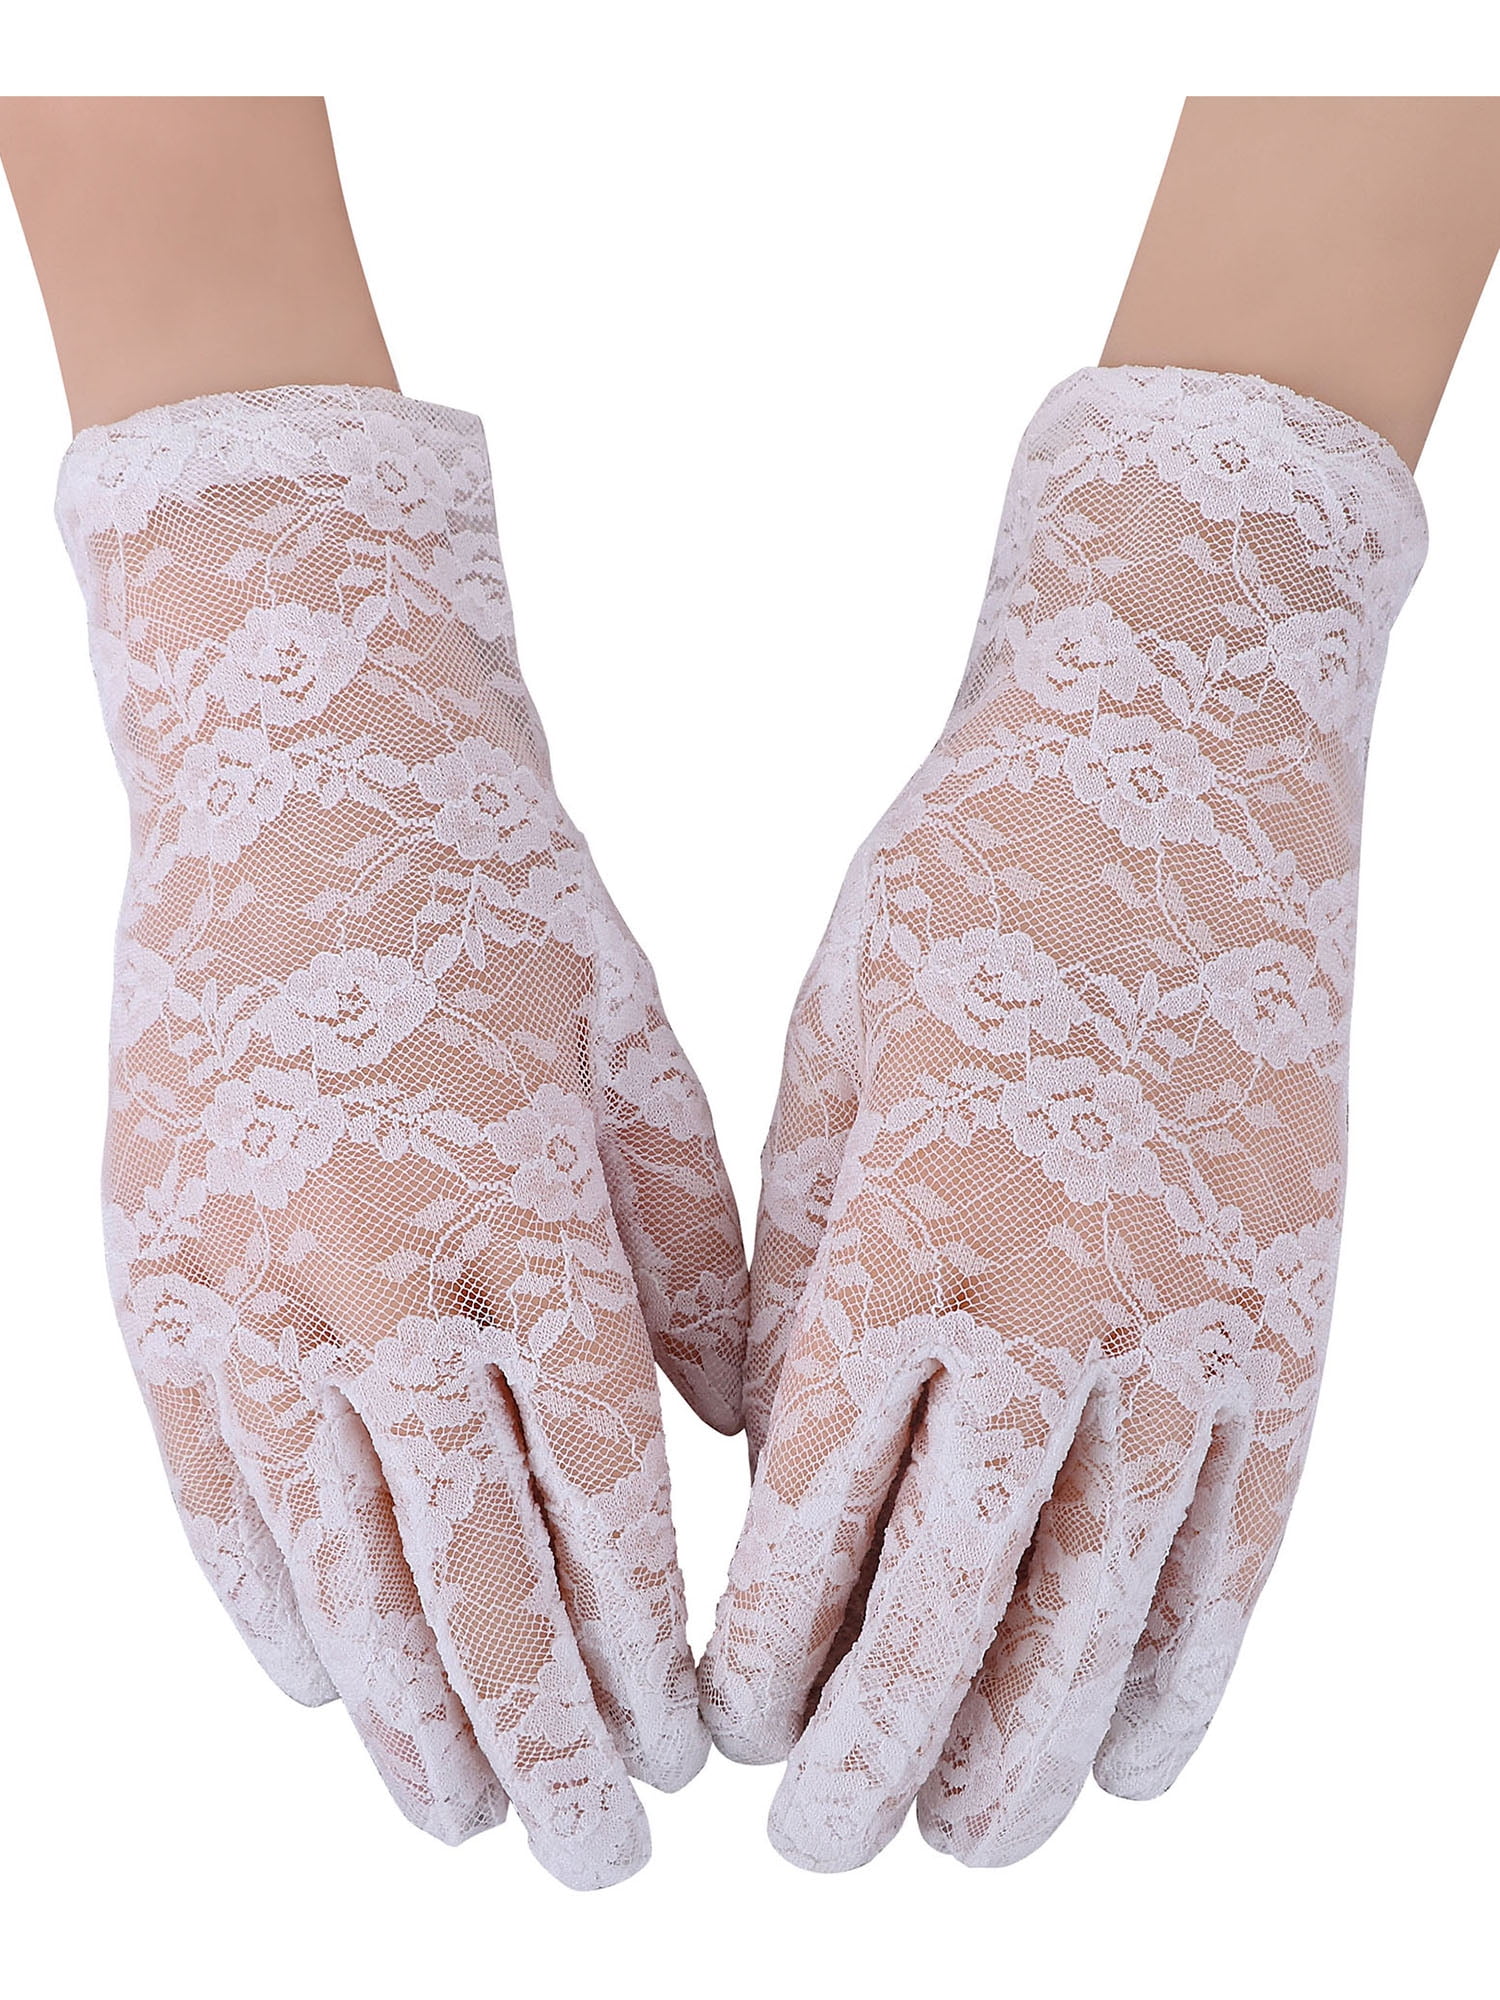 Elegant Lace Floral Long Bridal Glove Finger Mittens Prom Party Wedding